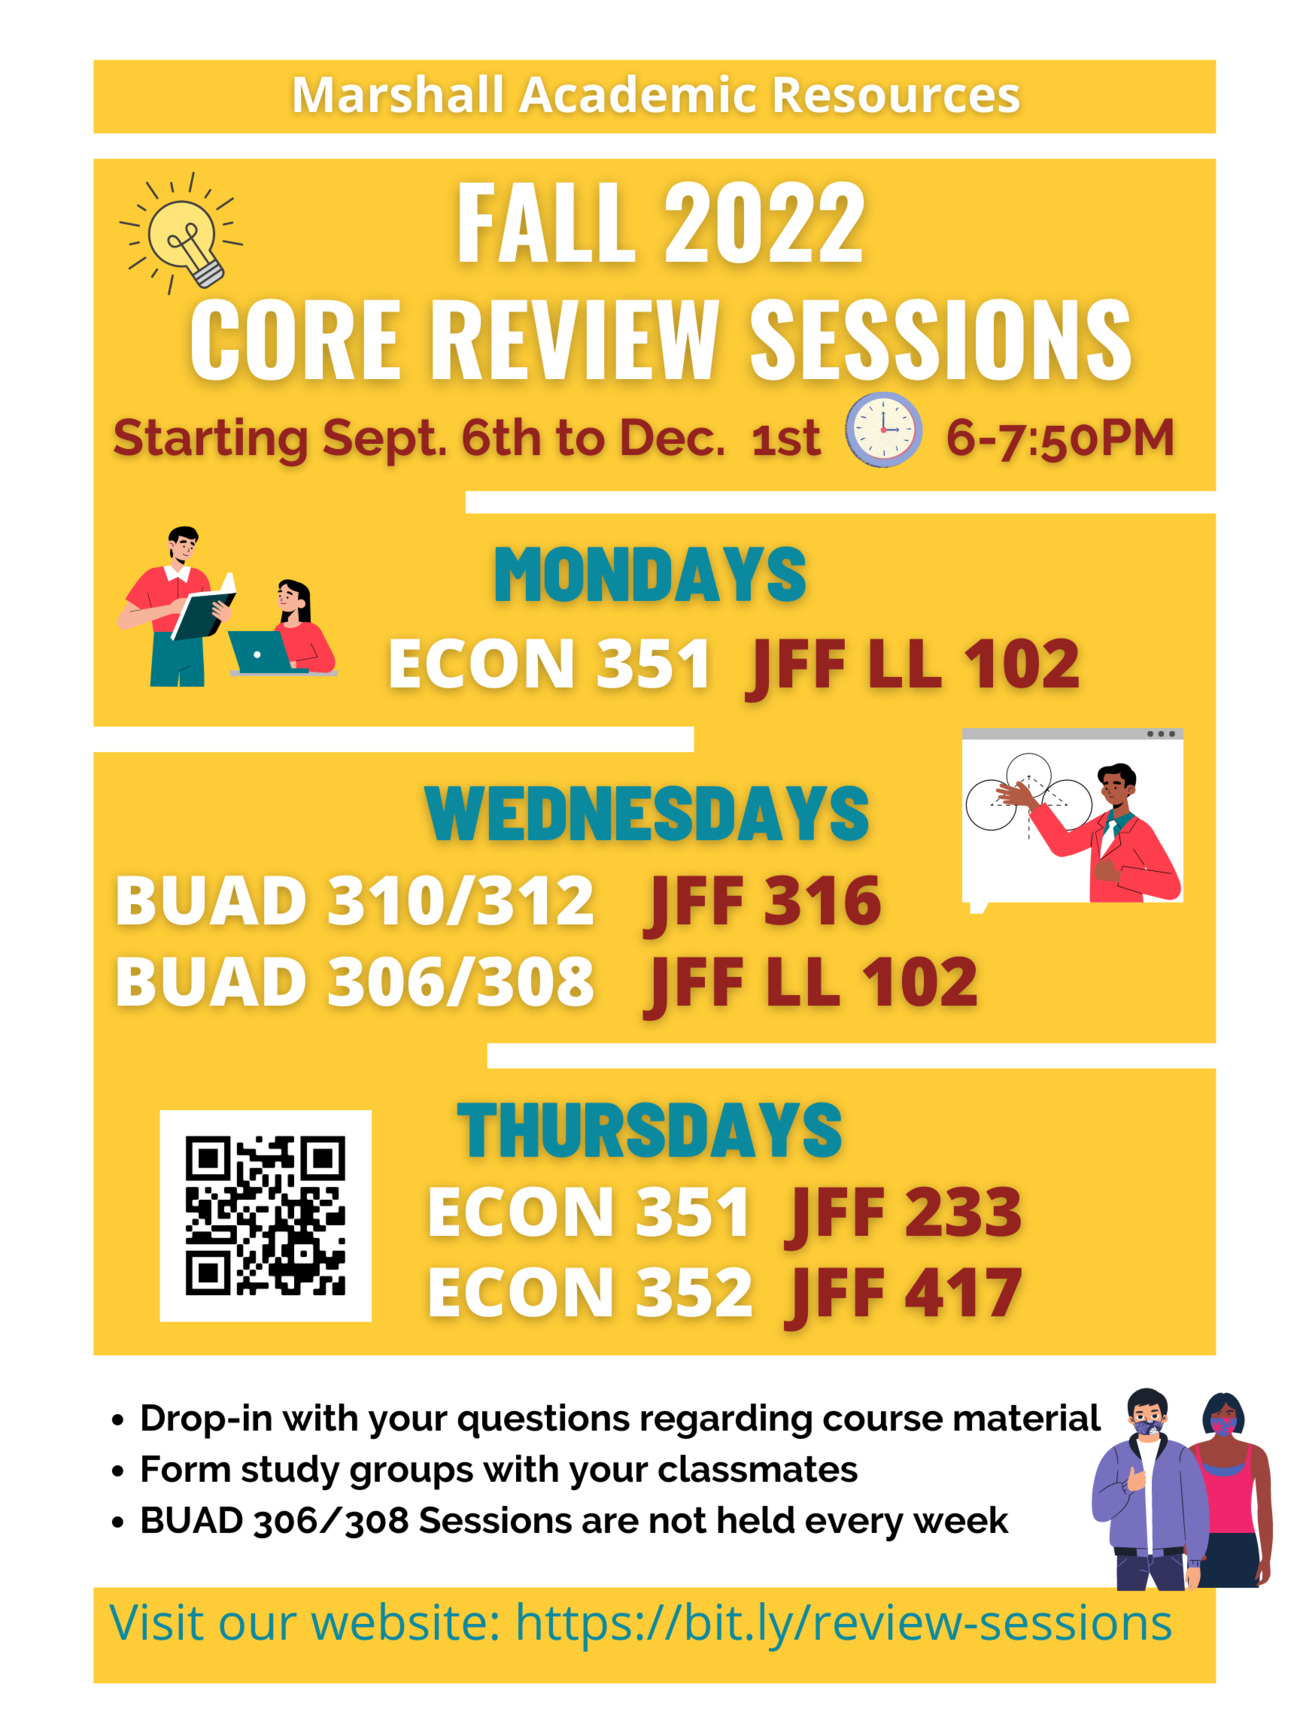 Fall 2022 Core Review Schedule